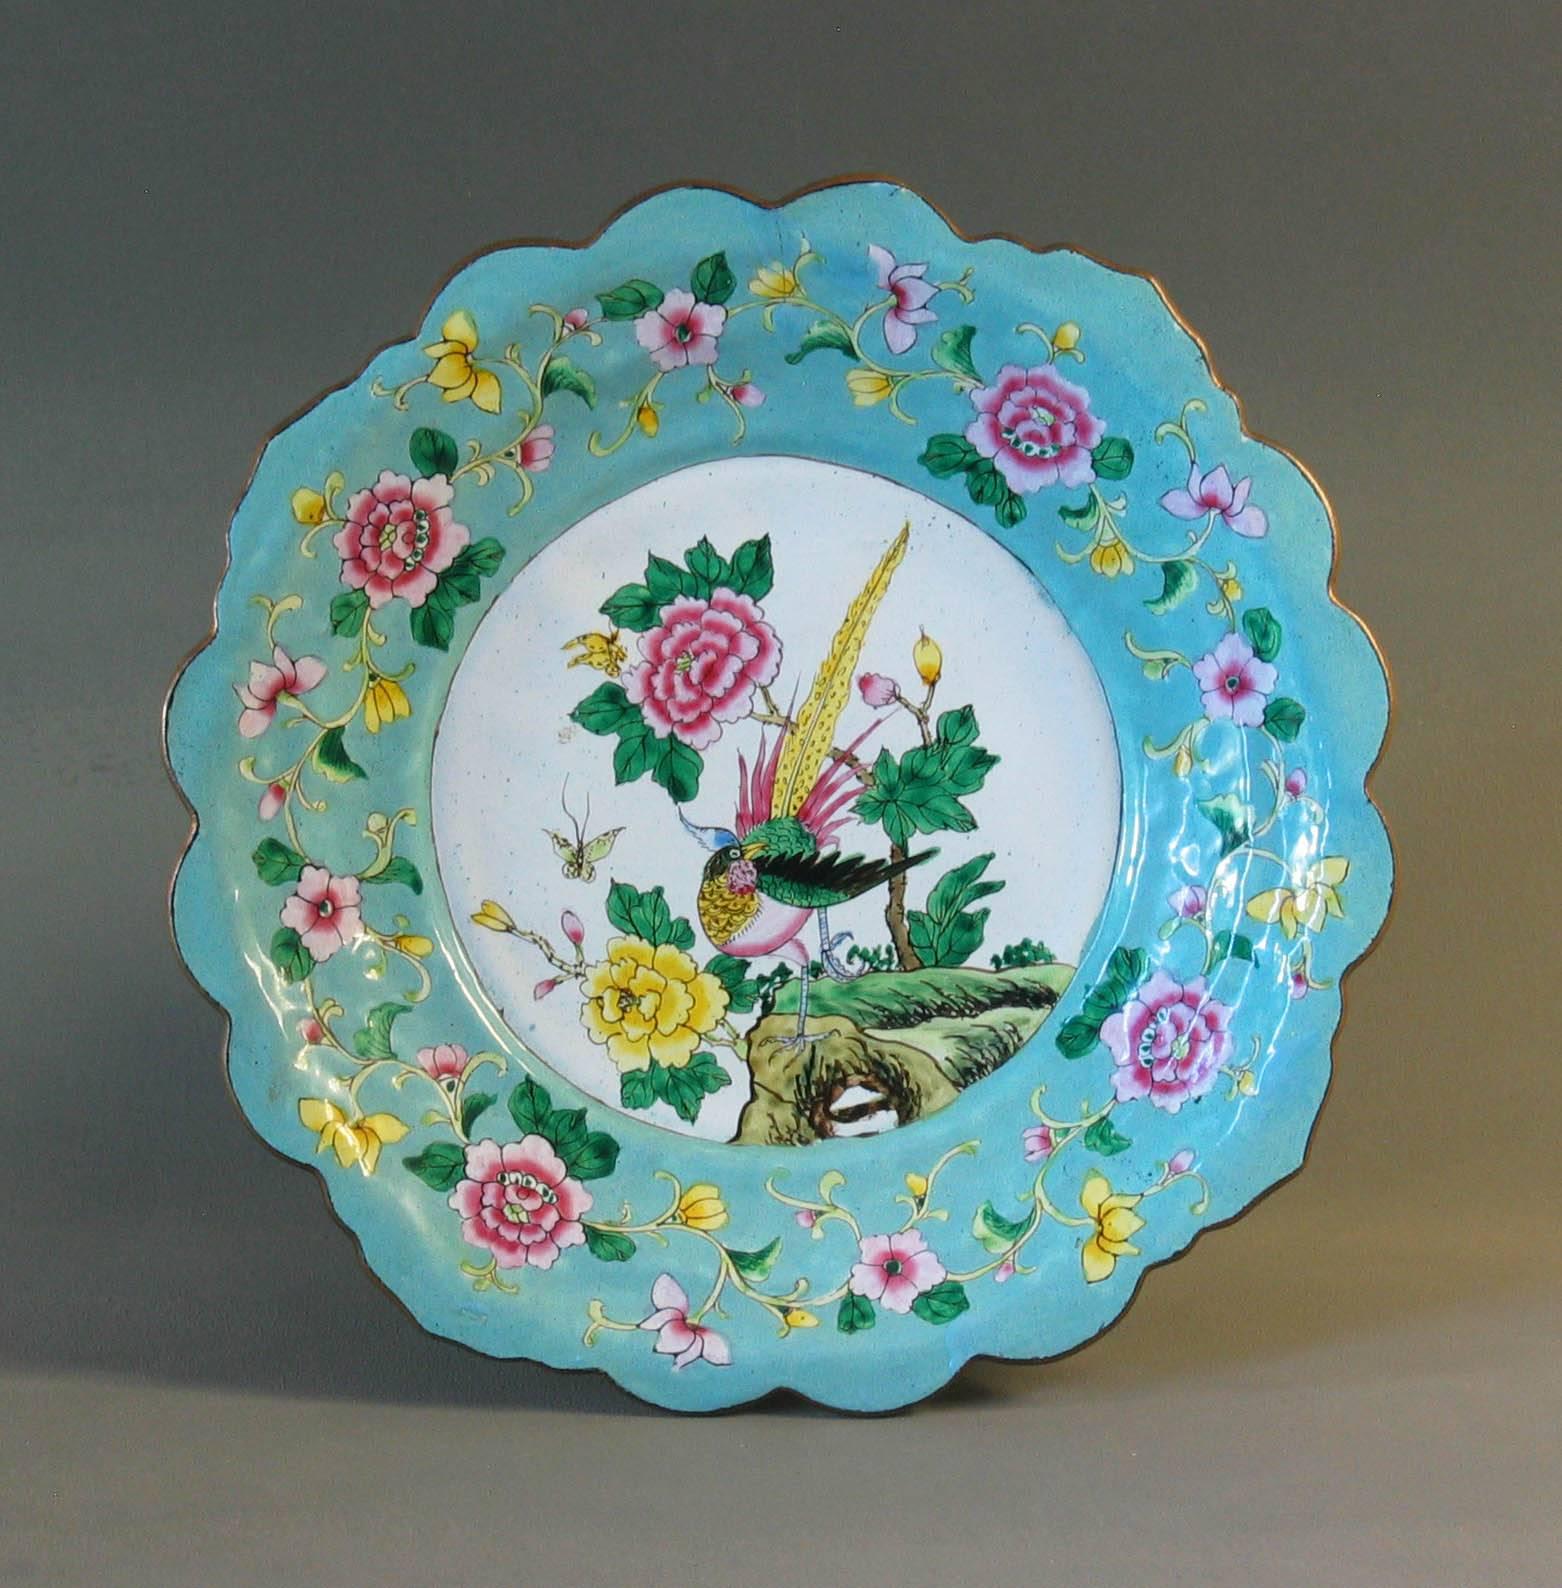 Canton Enamel Bracket-Lobed Dish Guangxu Period, 1875-1908 In Good Condition For Sale In Ottawa, Ontario